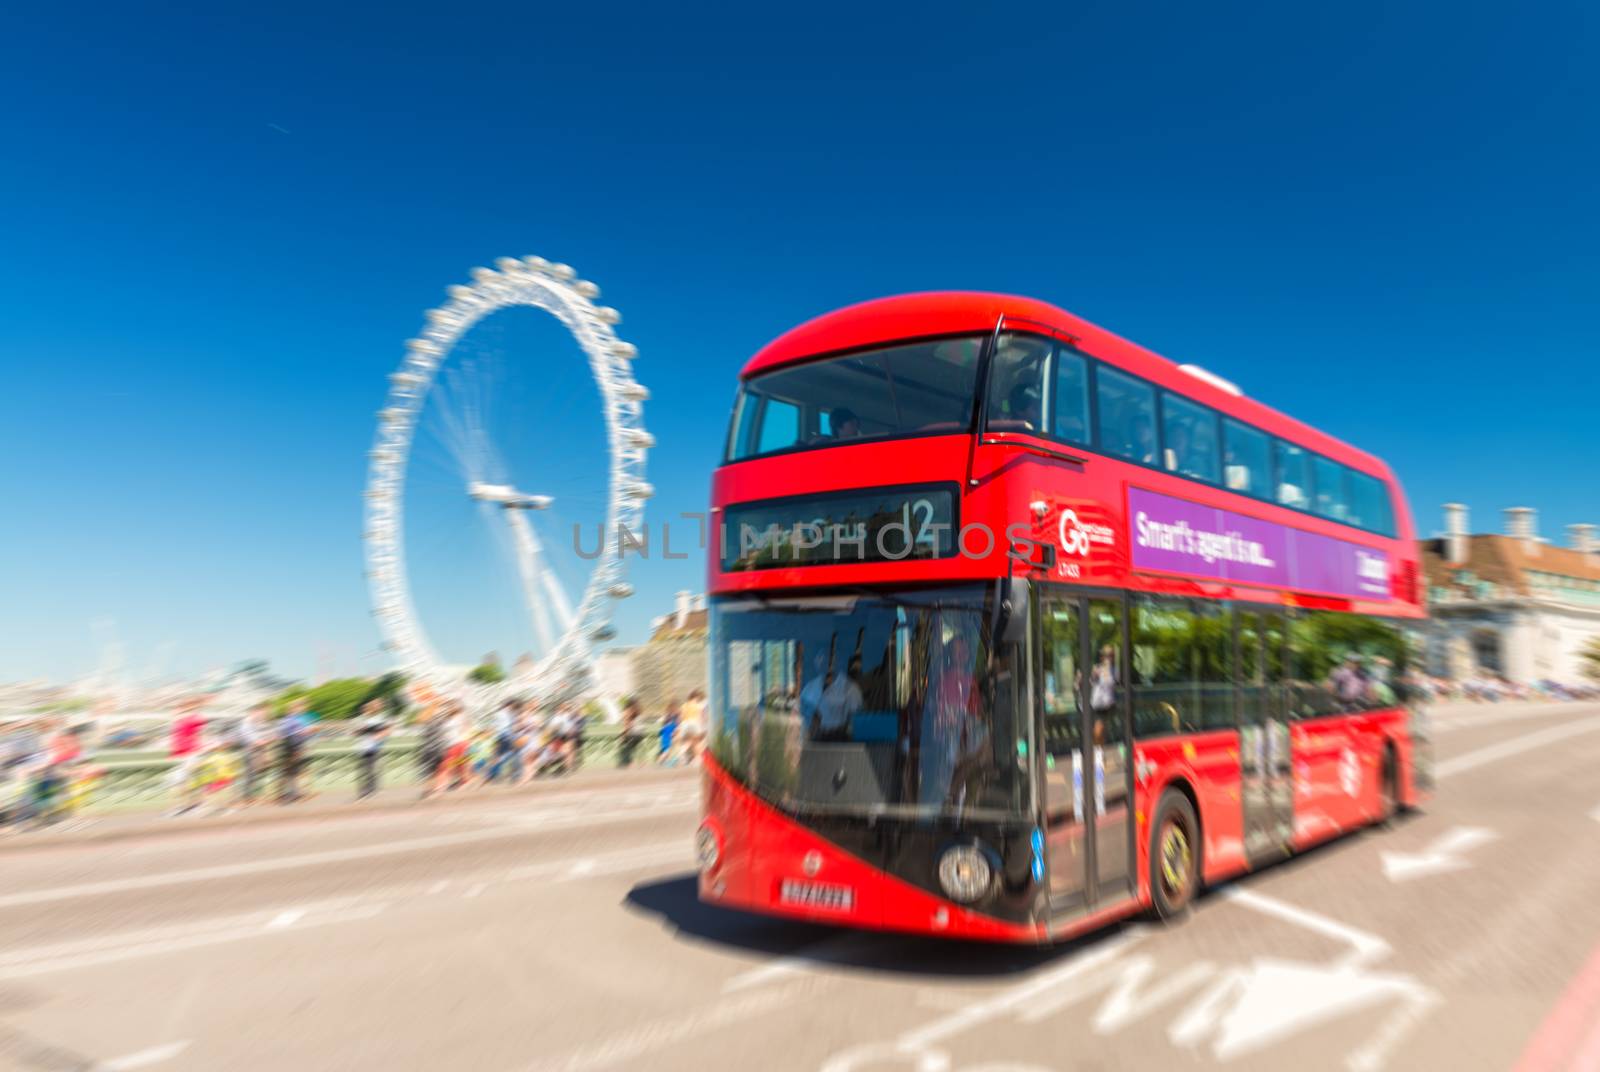 LONDON - JUNE 12, 2015: Fast moving red bus on Westminster Bridg by jovannig